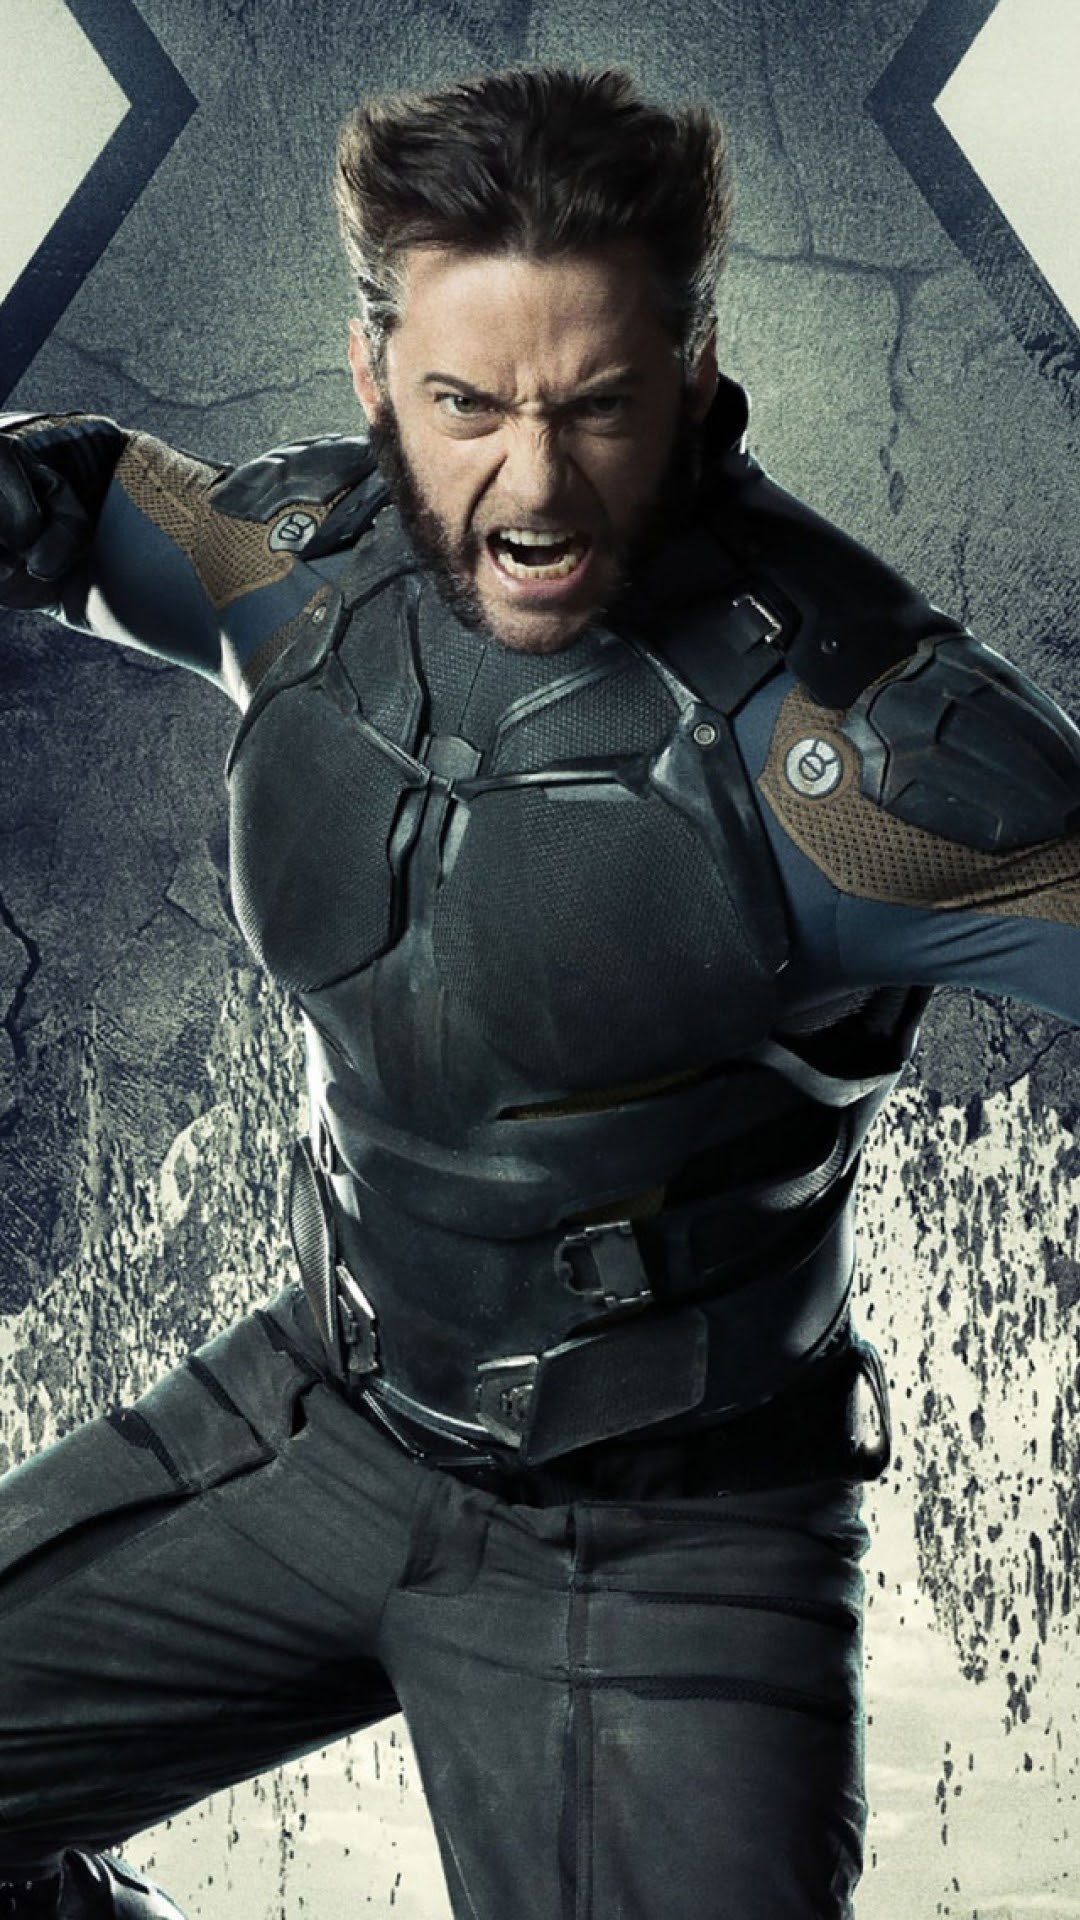 X-Men: Days of Future Past, Best wallpapers for Android, Wolverine in X-Men, Superhero art, 1080x1920 Full HD Handy